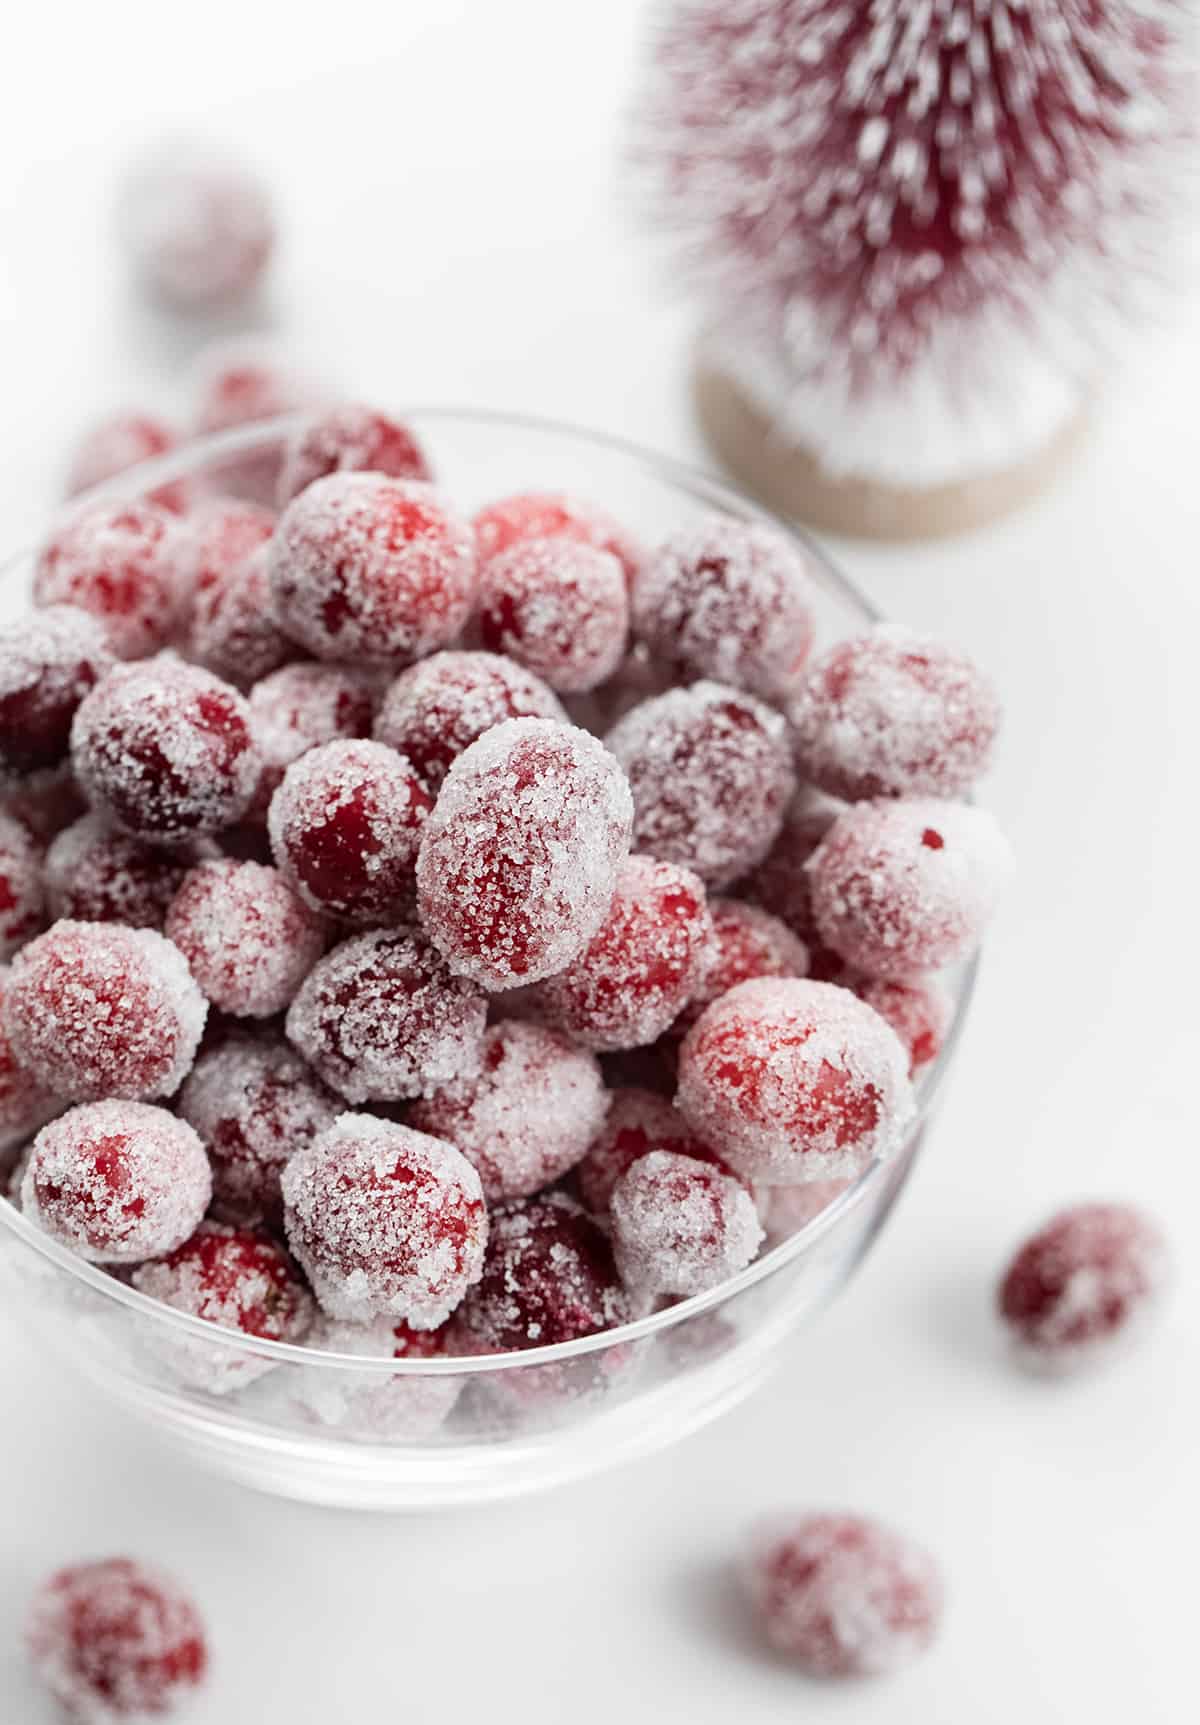 Close up of Sugared Cranberries in a Bowl on a White Counter.